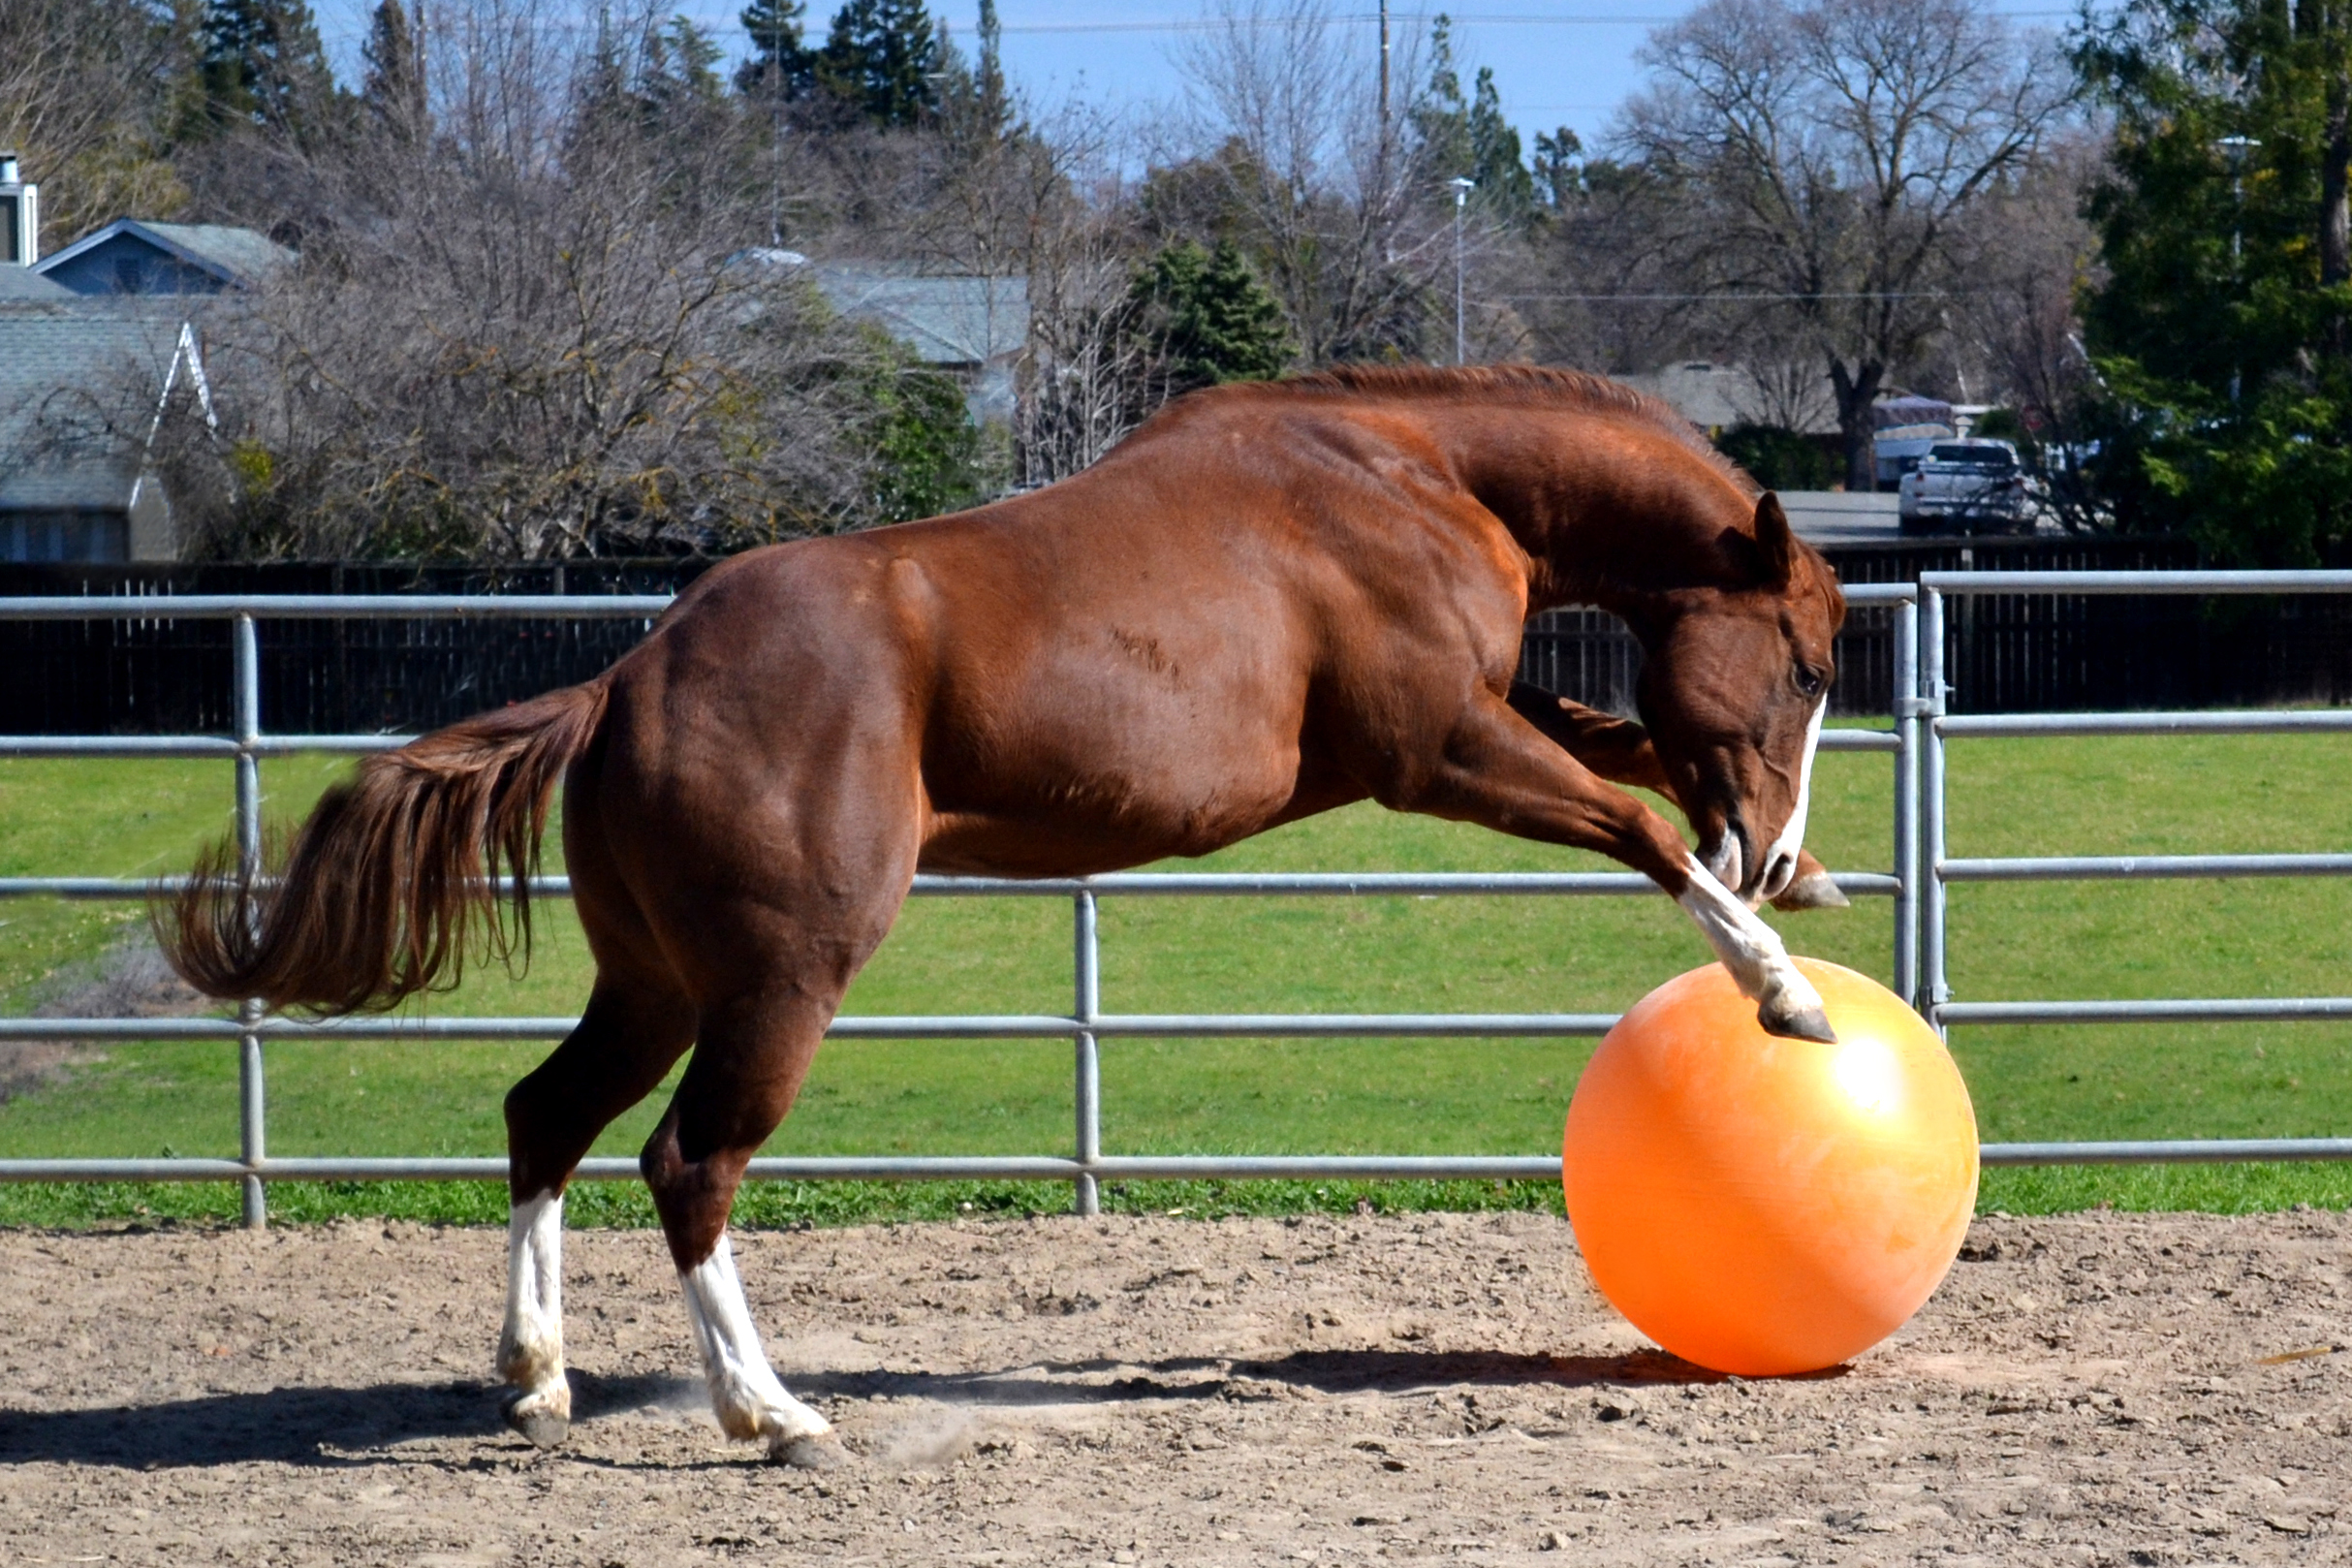 A horse playing with a large stall toy, a ball